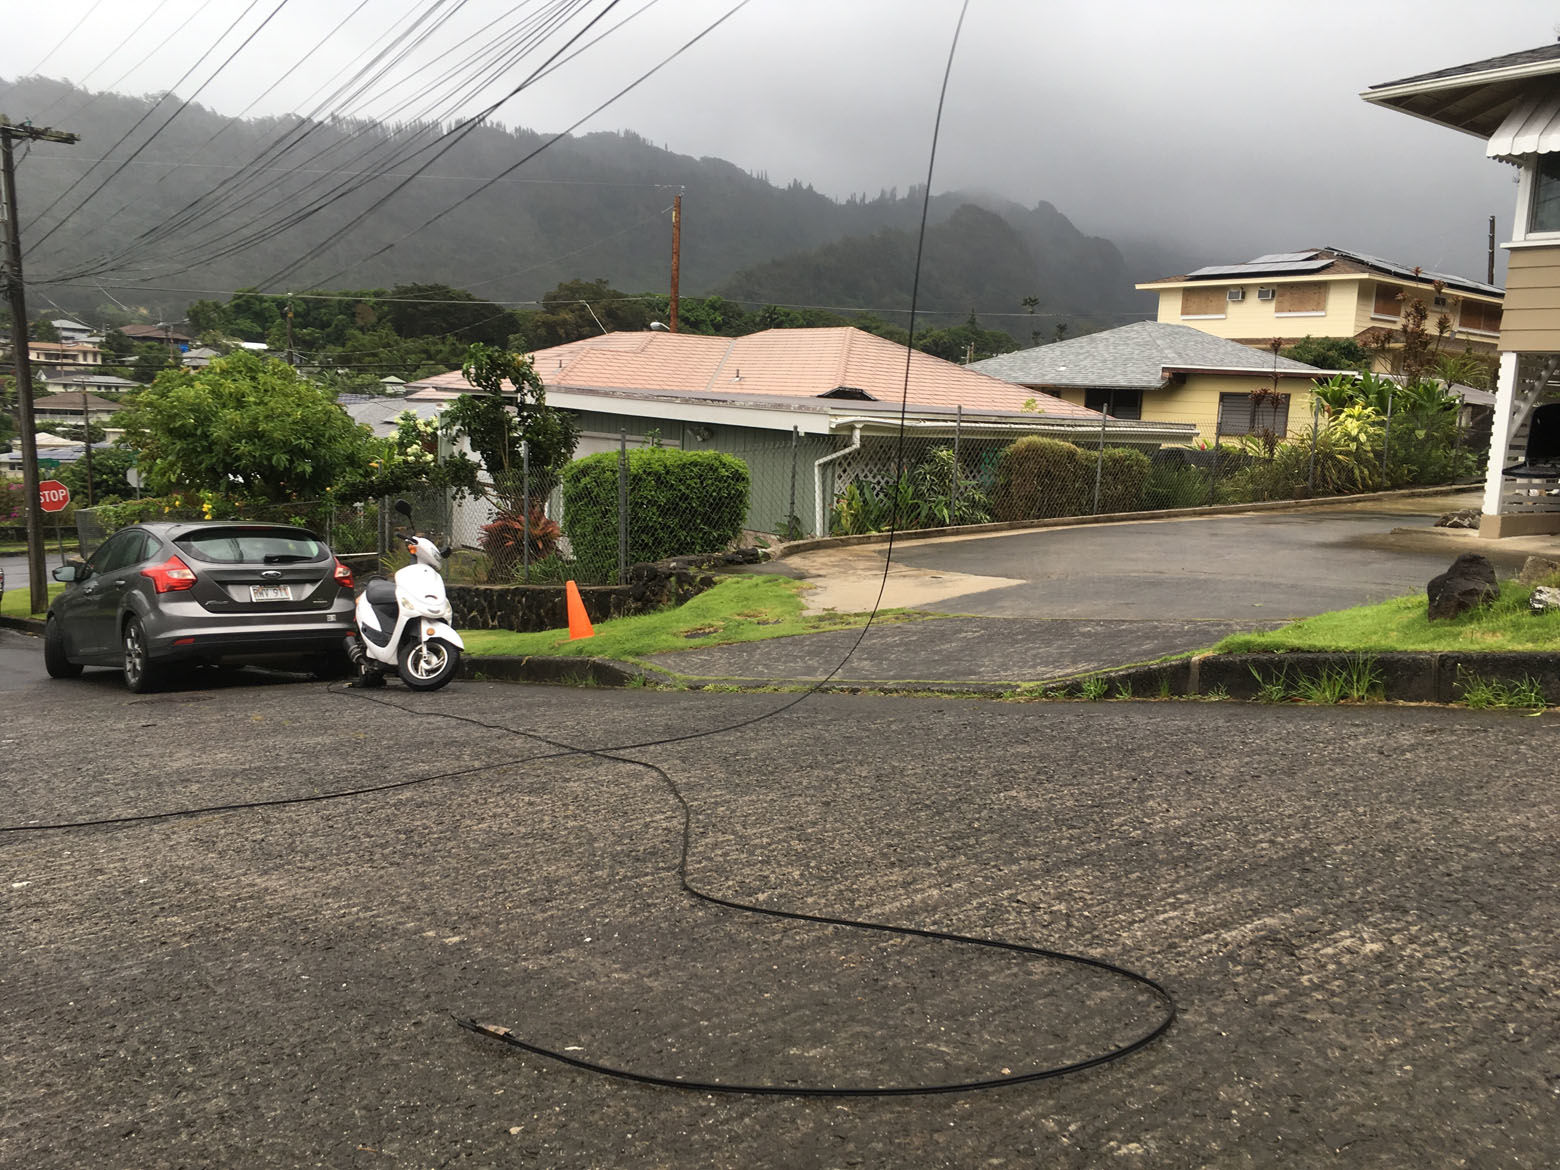 A utility line lays in the street in the Nuuanu neighborhood of Honolulu, Friday, Aug. 24, 2018, as Hurricane Lane approaches. Hurricane Lane barreled toward Hawaii on Friday, dumping torrential rains that caused flooding on the Big Island as people stocked up on supplies and piled sandbags to shield oceanfront businesses against the increasingly violent surf.  (AP Photo/Caleb Jones)